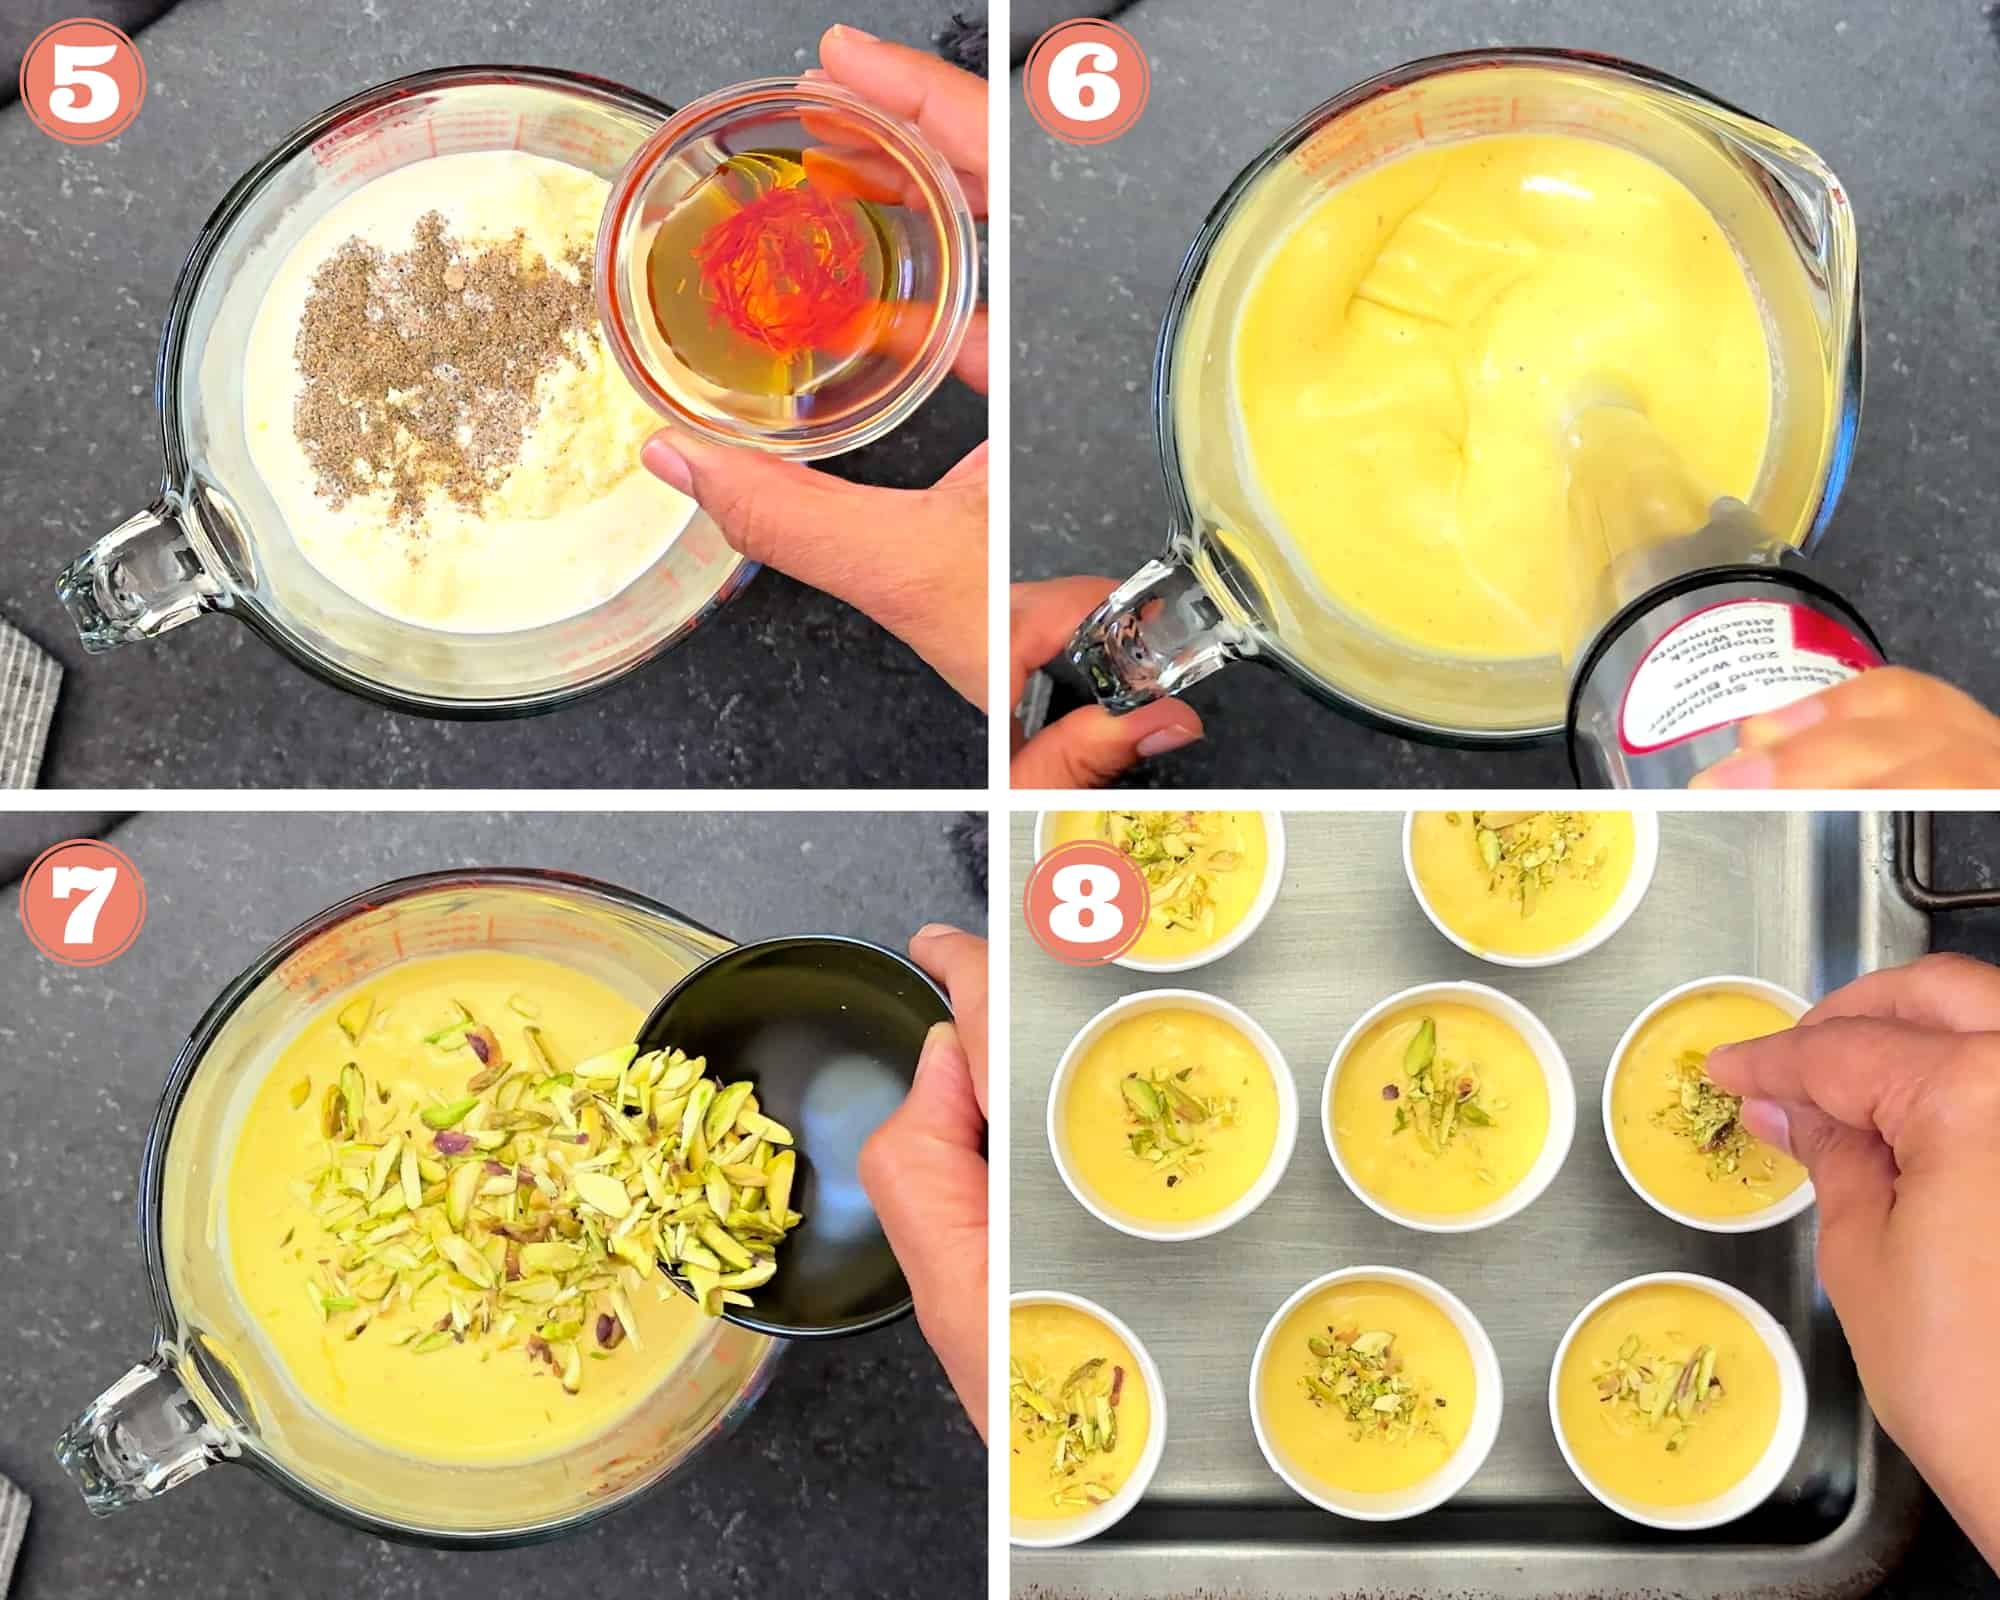 4-Image grid showing how to prepare and pour mango ice cream batter, then garnish with pistachios